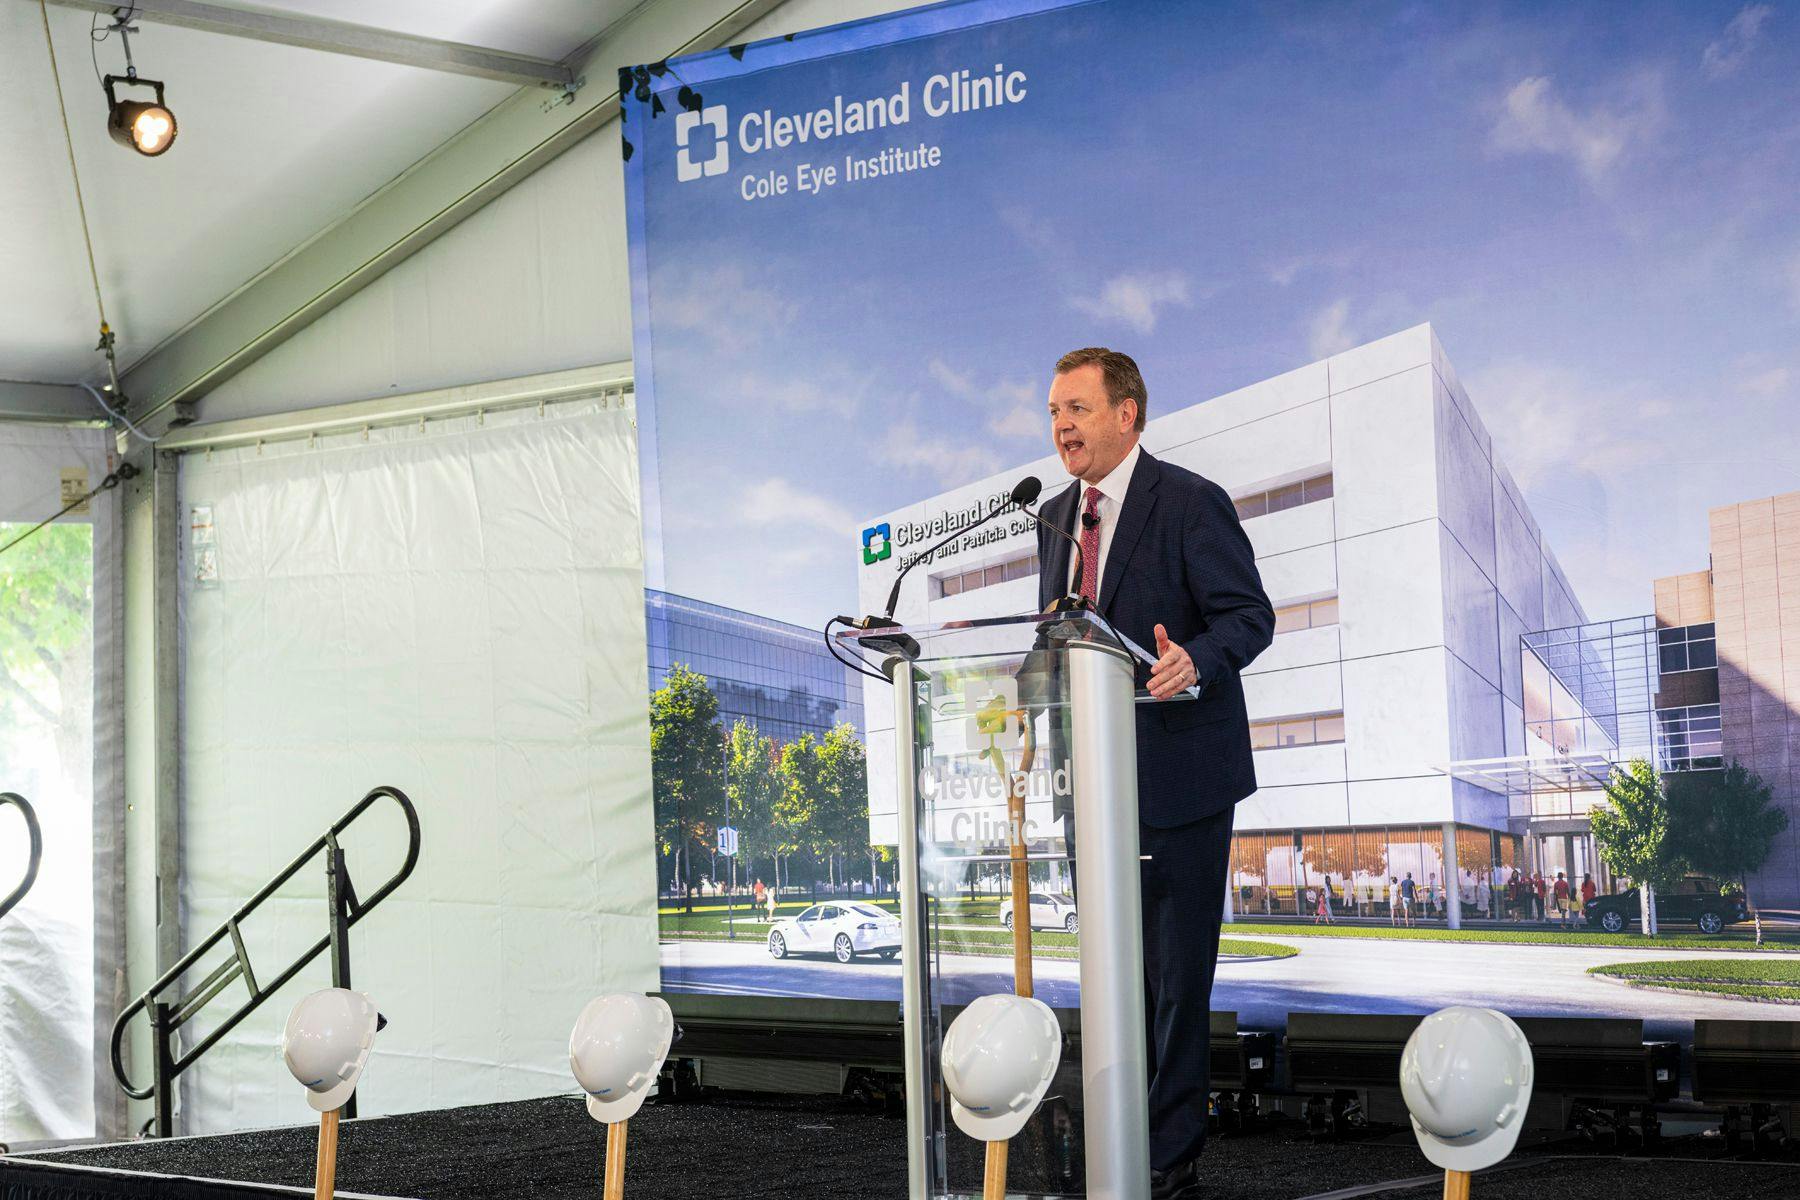 Daniel F. Martin, MD, chairman of Cole Eye Institute and the Barbara and A. Malachi Mixon III Institute Chair of Ophthalmology, speaks at the groundbreaking ceremony of an expansion project. (Image courtesy of Cleveland Clinic)